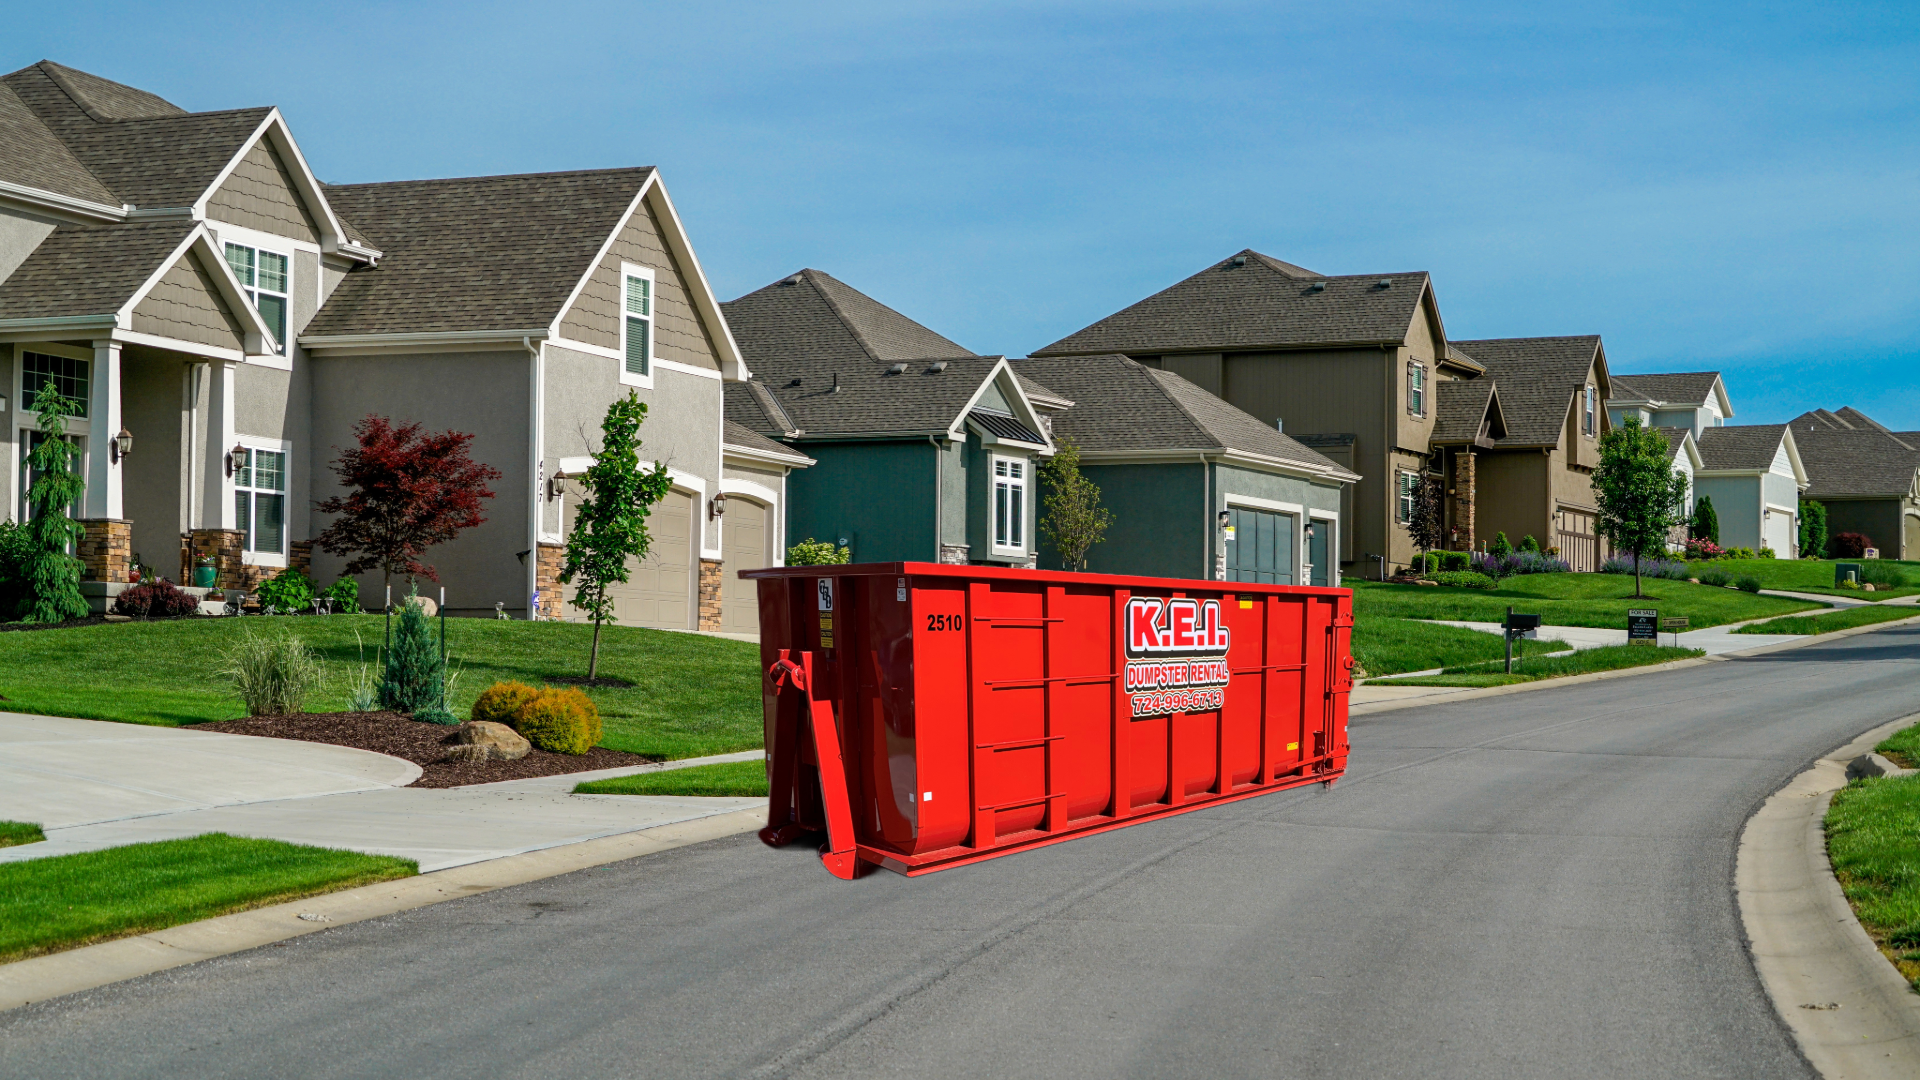 A red KEI roll-off dumpster sits curbside in a residential neighborhood. The dumpster is in the street, sandwiched between two driveways.